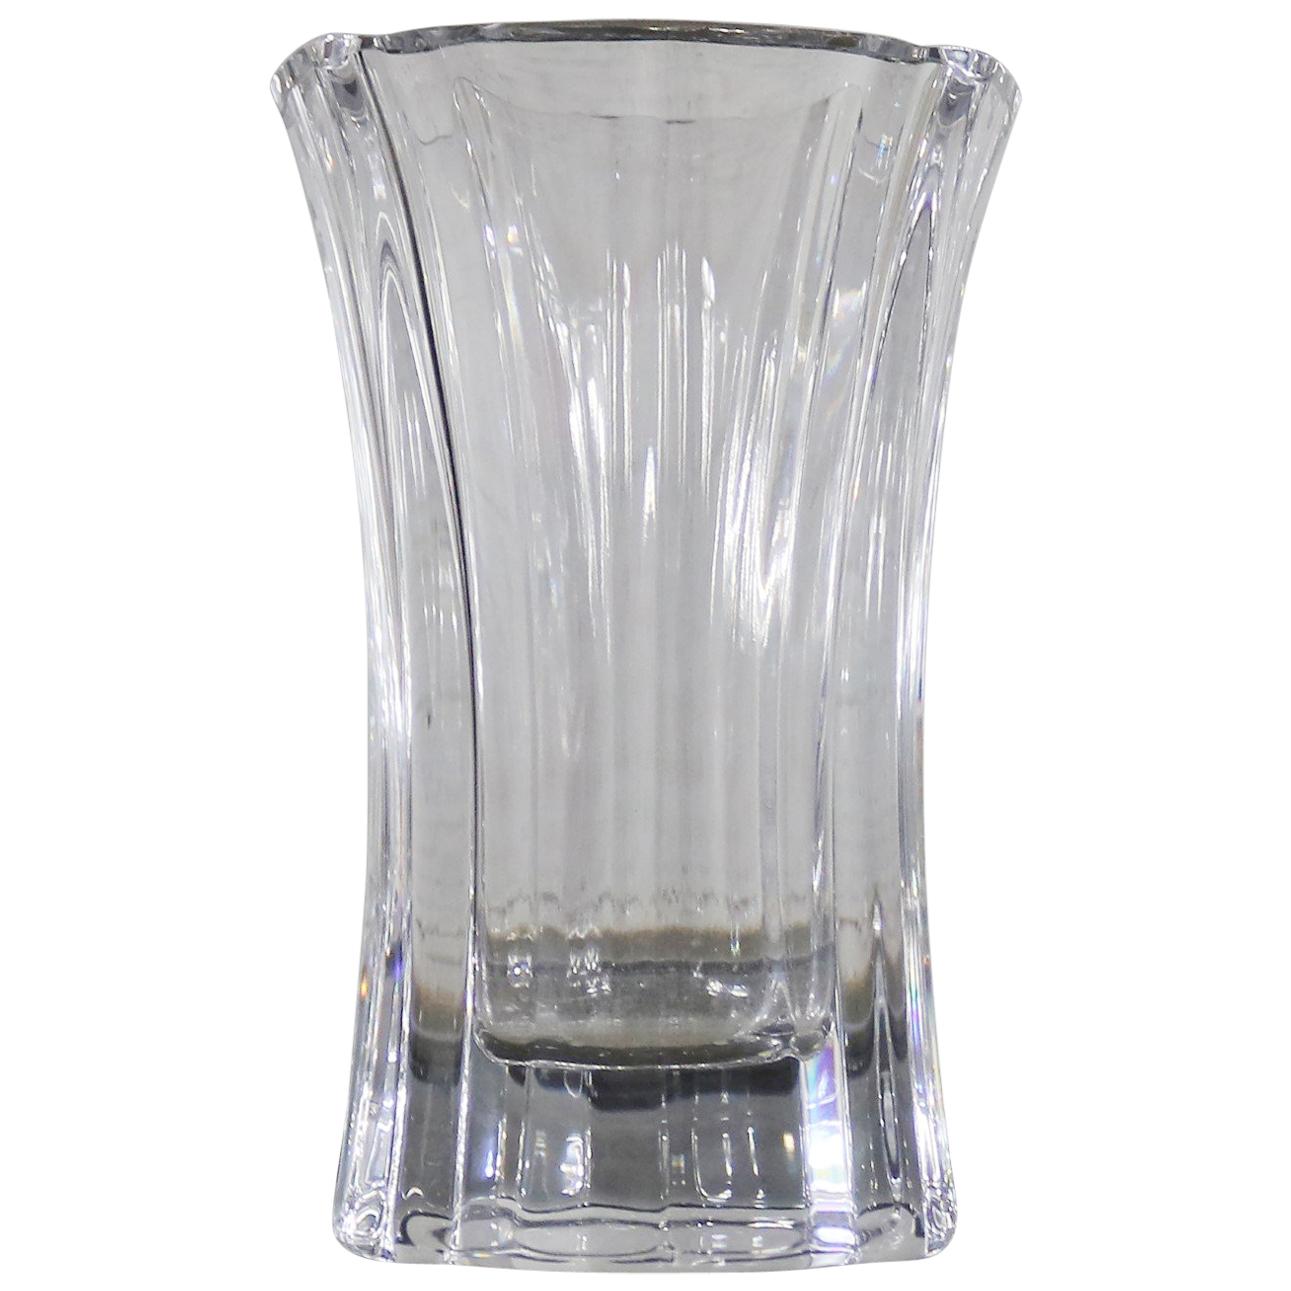 Orrefors Crystal Vase by Lars Hellsten Signed and Numbered LH 4599-22